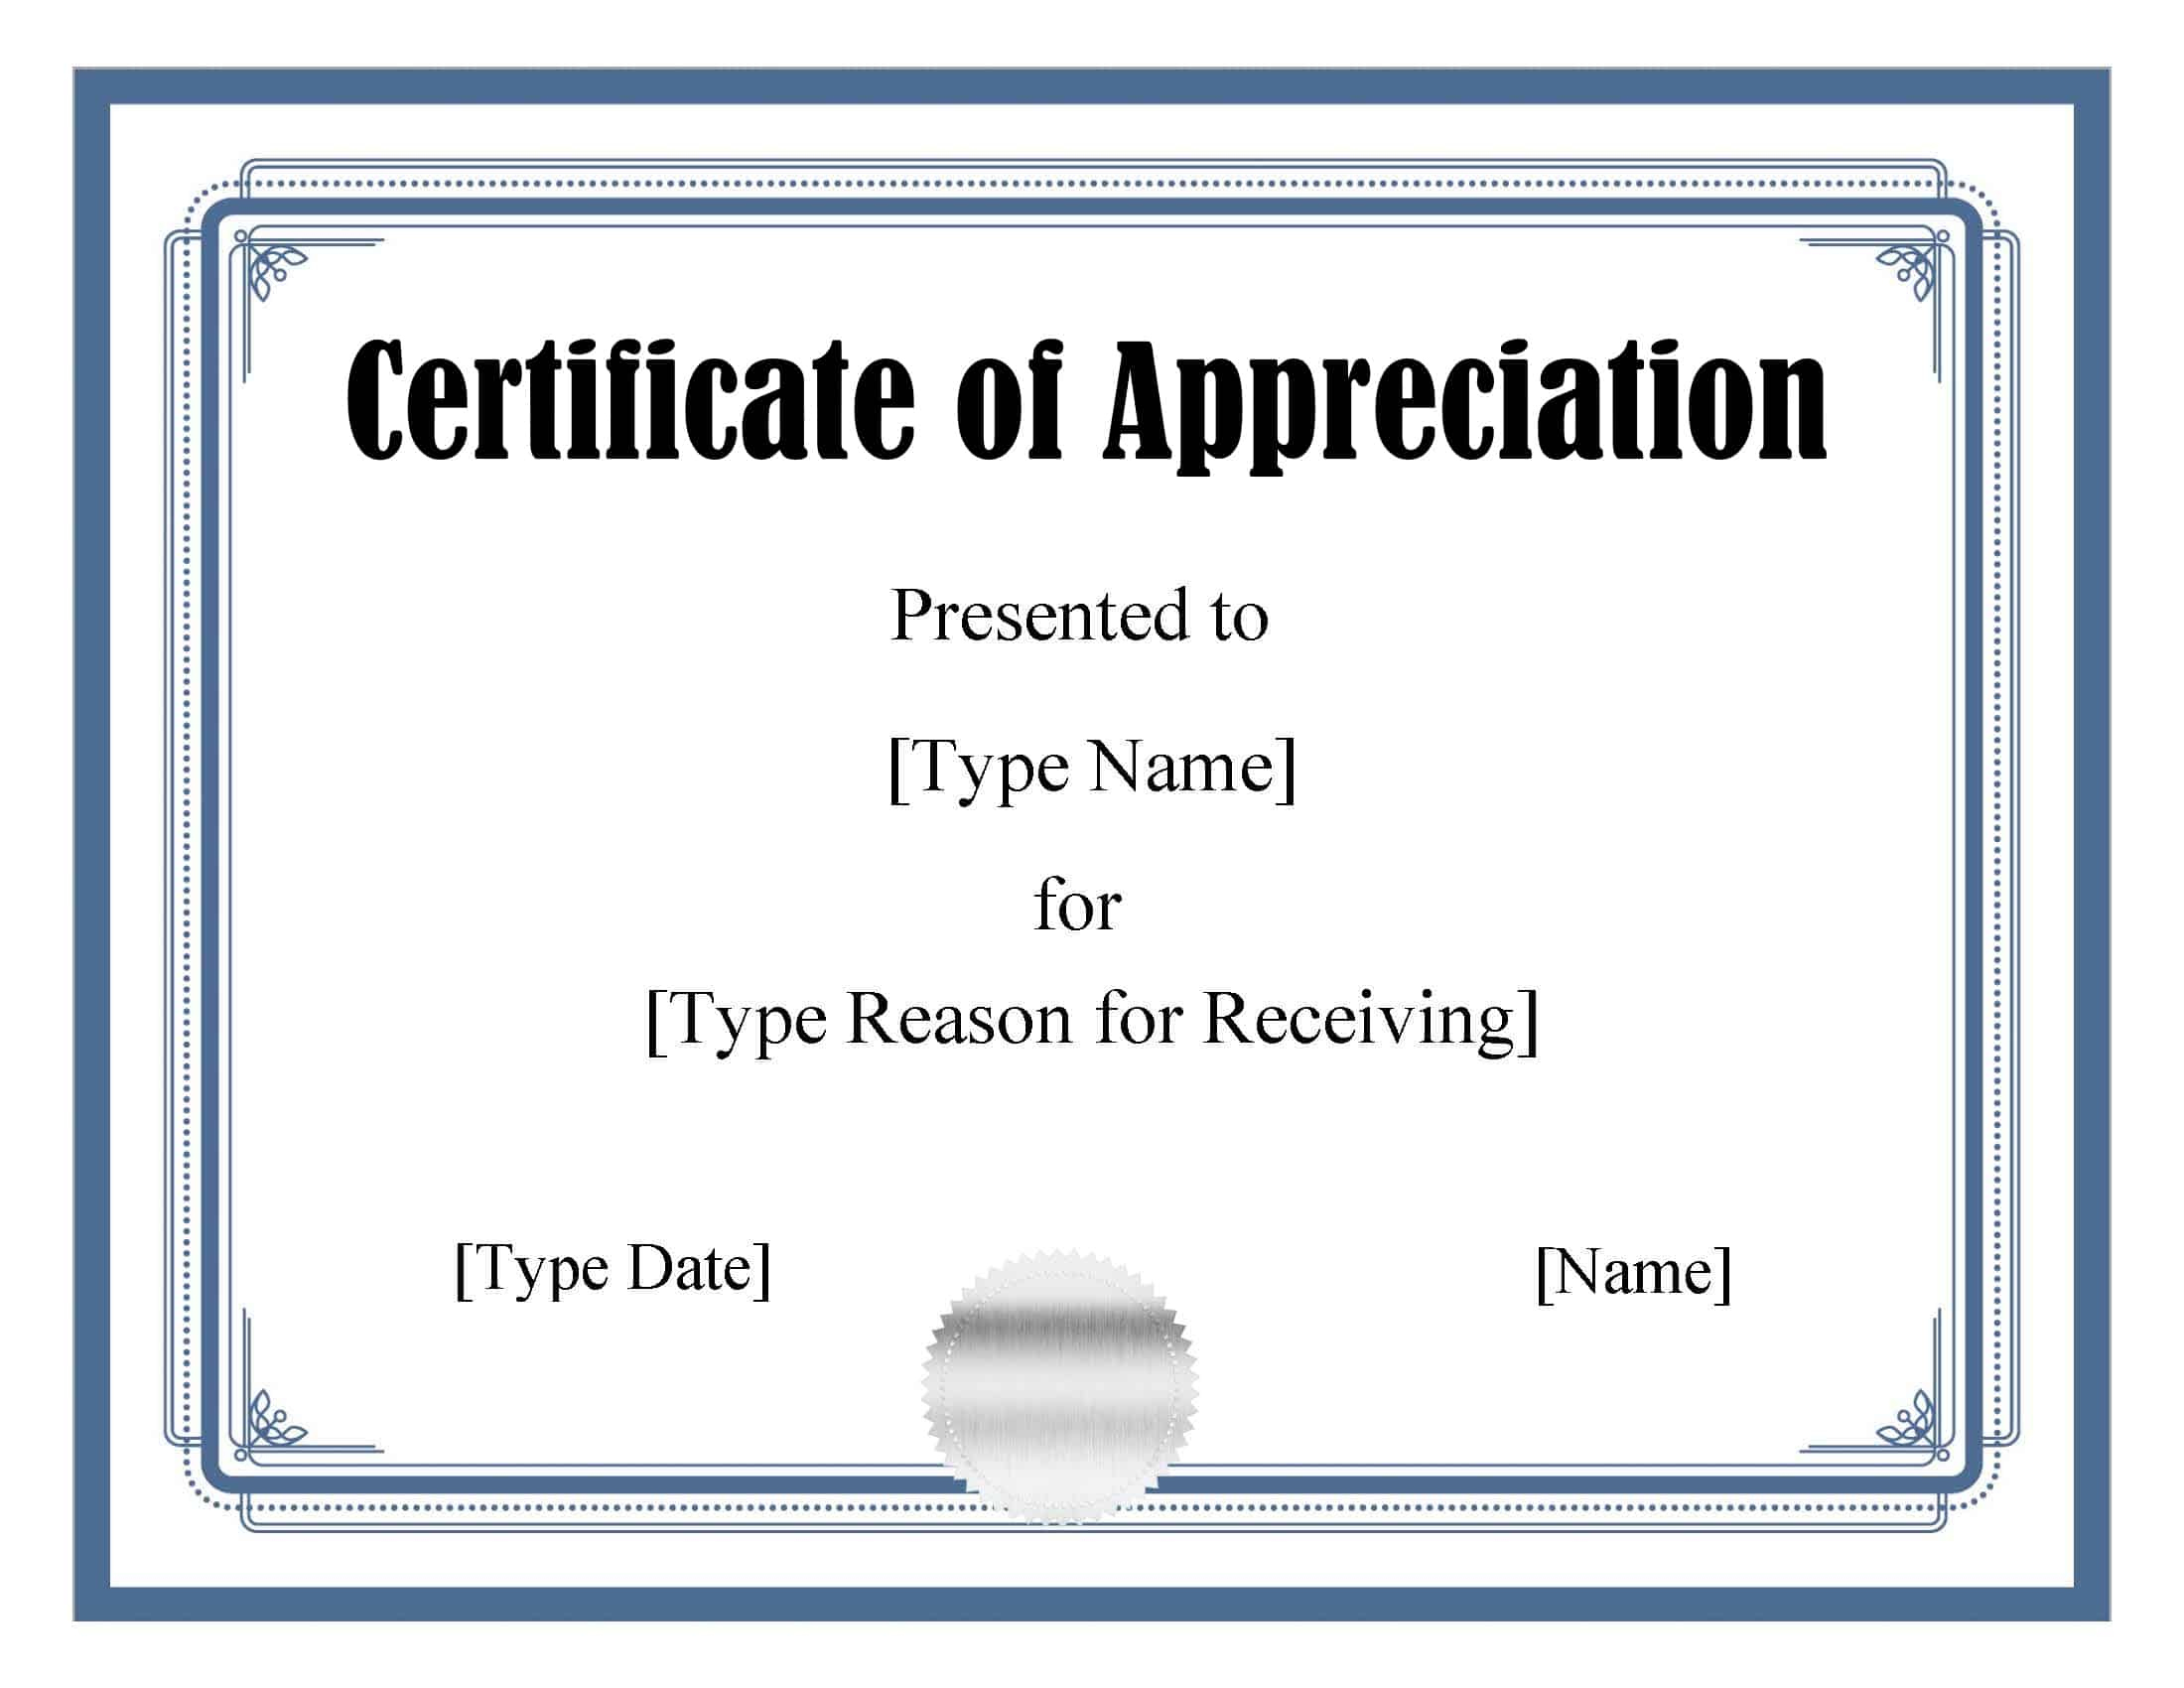 Free Certificate Template Word | Instant Download intended for Free Certificate Of Appreciation Template Downloads